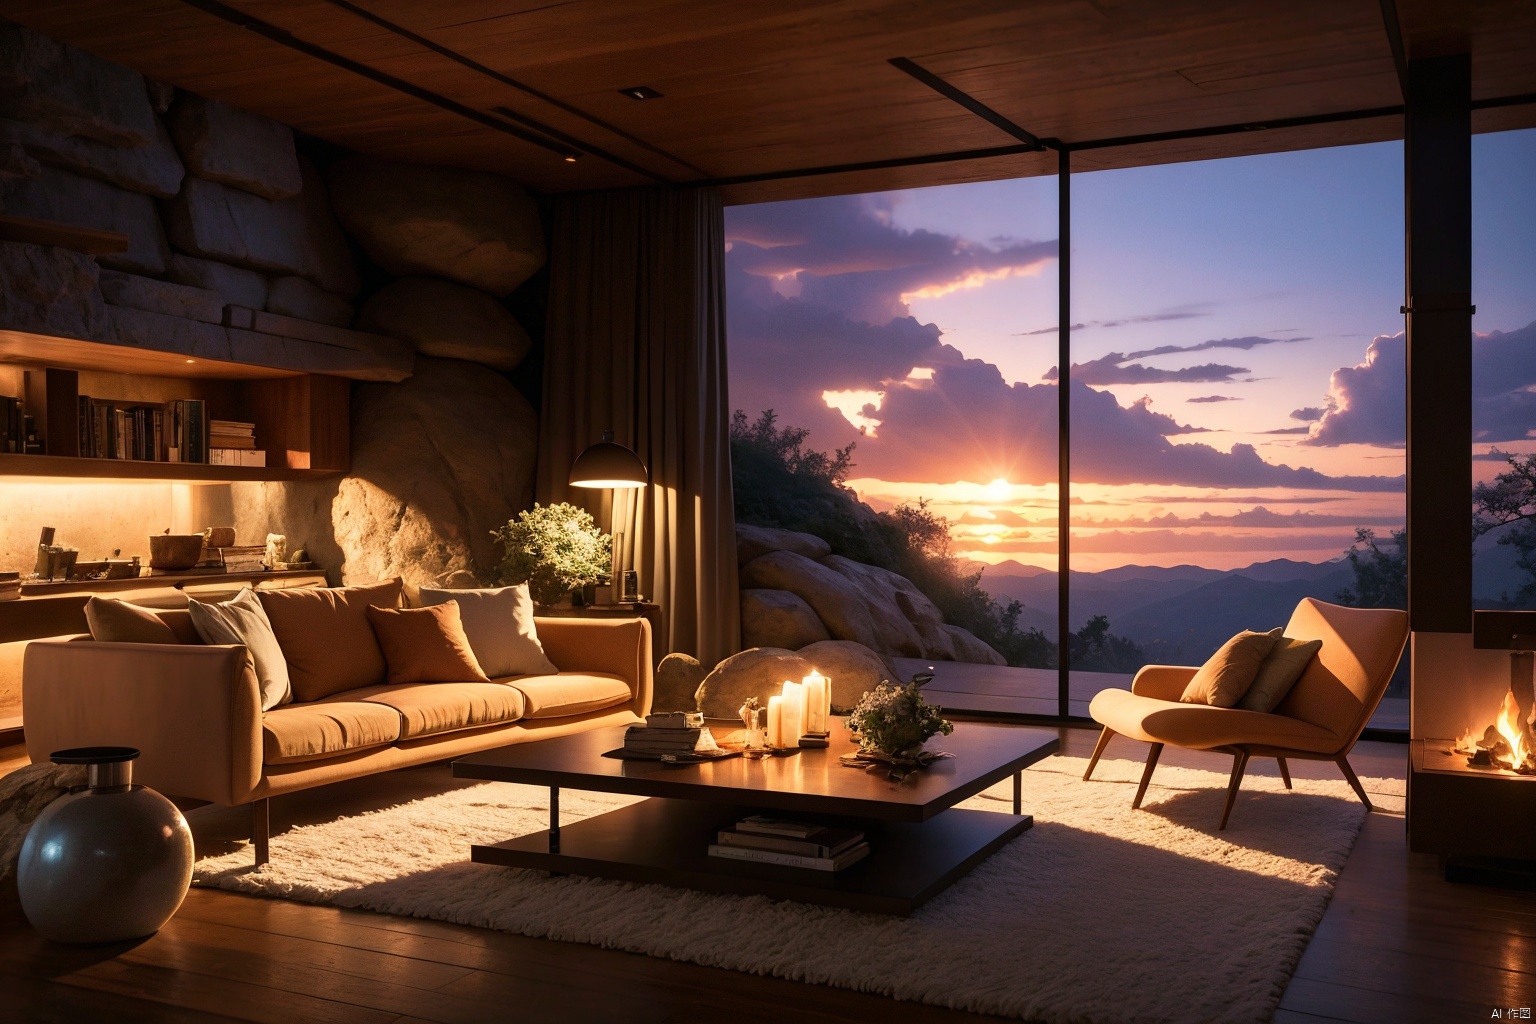 Architectural rendering, architectural design, rock architecture, dramatic moody sunset lighting, long shadows, (Volume: 1.5), cinematic atmosphere Photorealistic hyper-realistic rendering of a beautifully decorated cozy living room interior, 8k HD wallpaper, natural night view, natural wilderness, natural architecture industrial architecture, nature, rock architecture